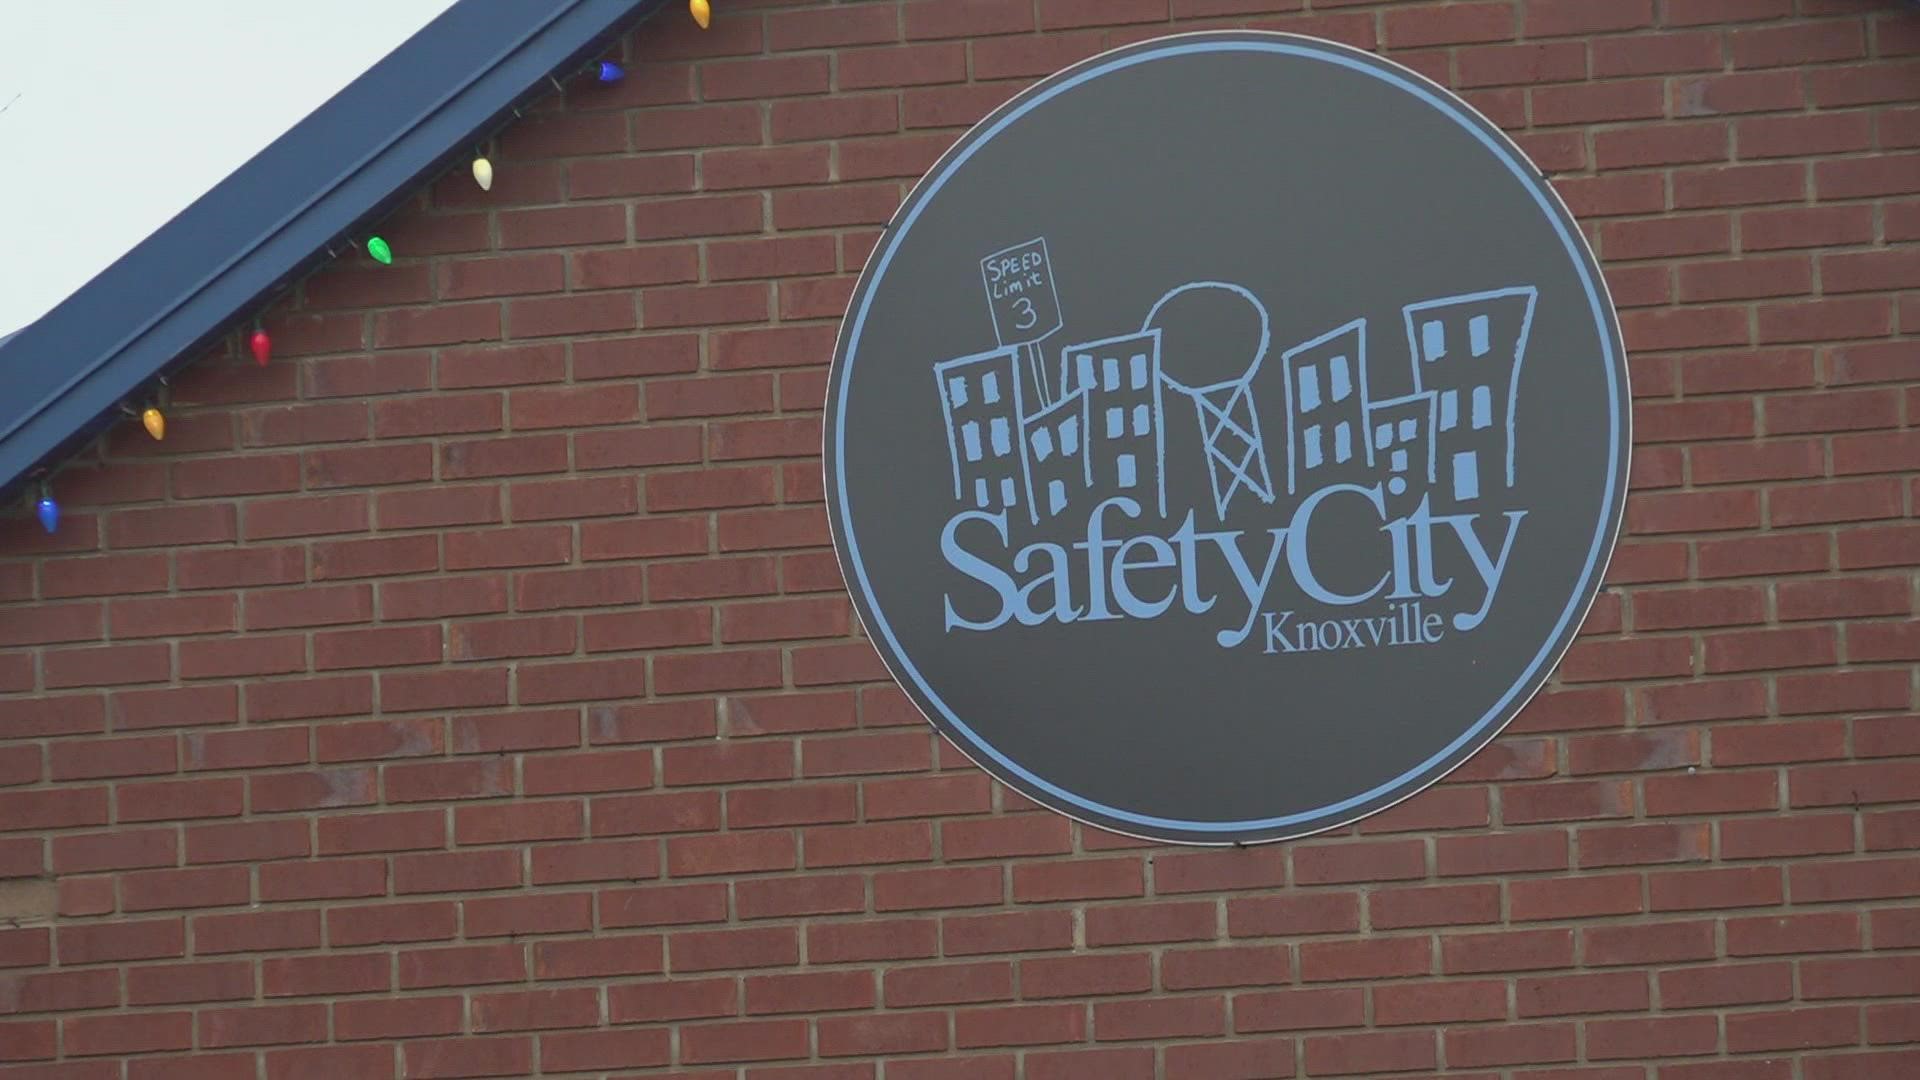 Right now, you can ring in the Christmas spirit at Knoxville's very own tiny town - Safety City.